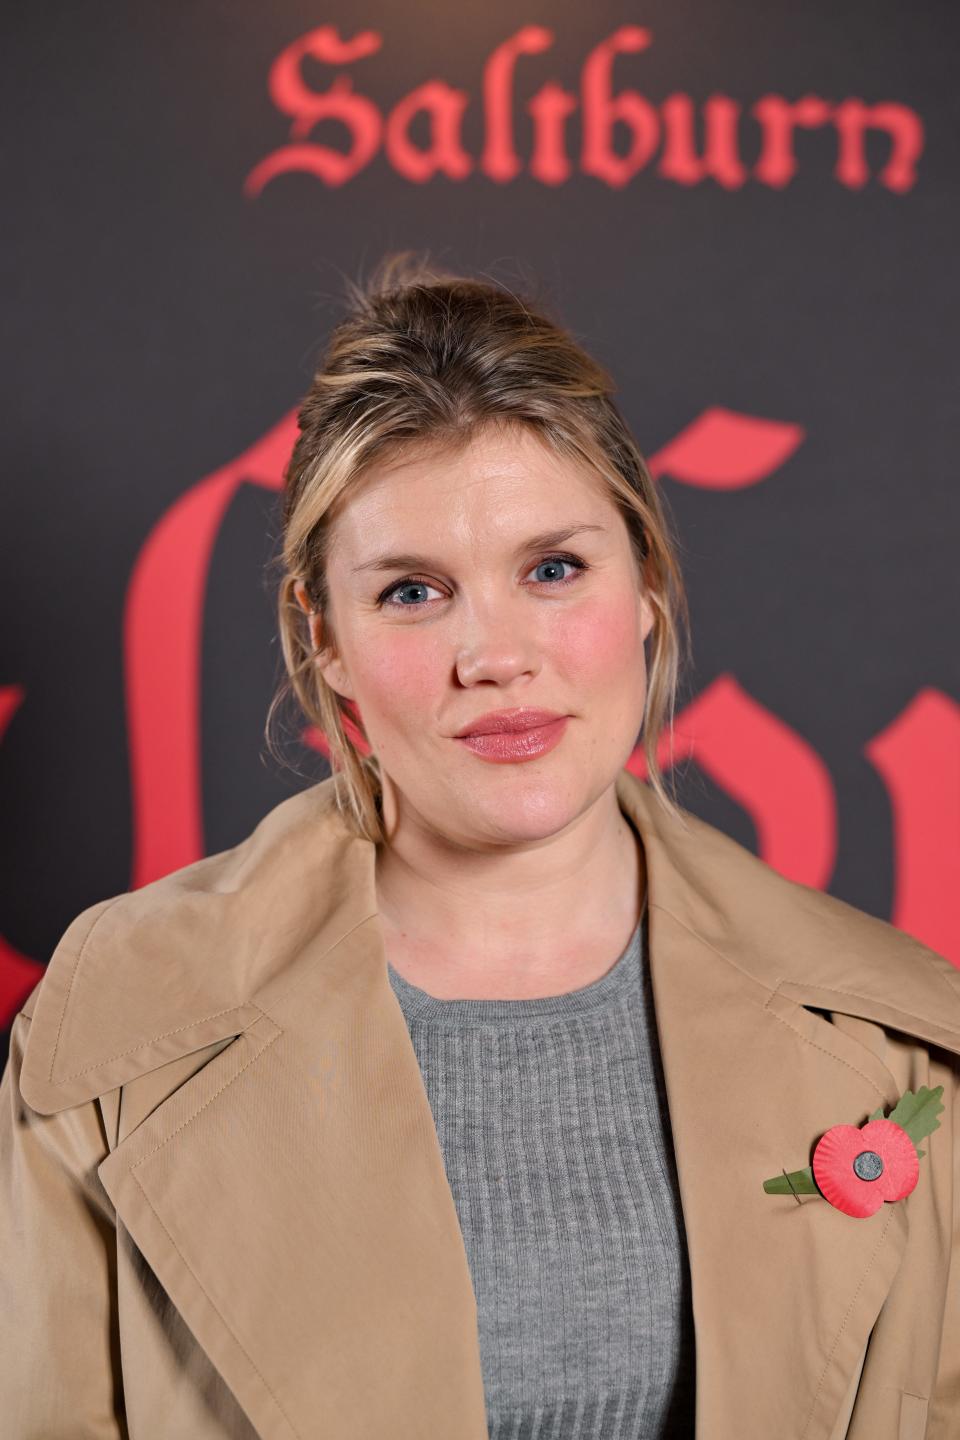 "Saltburn" writer/director Emerald Fennell at a London screening of the film earlier this month.